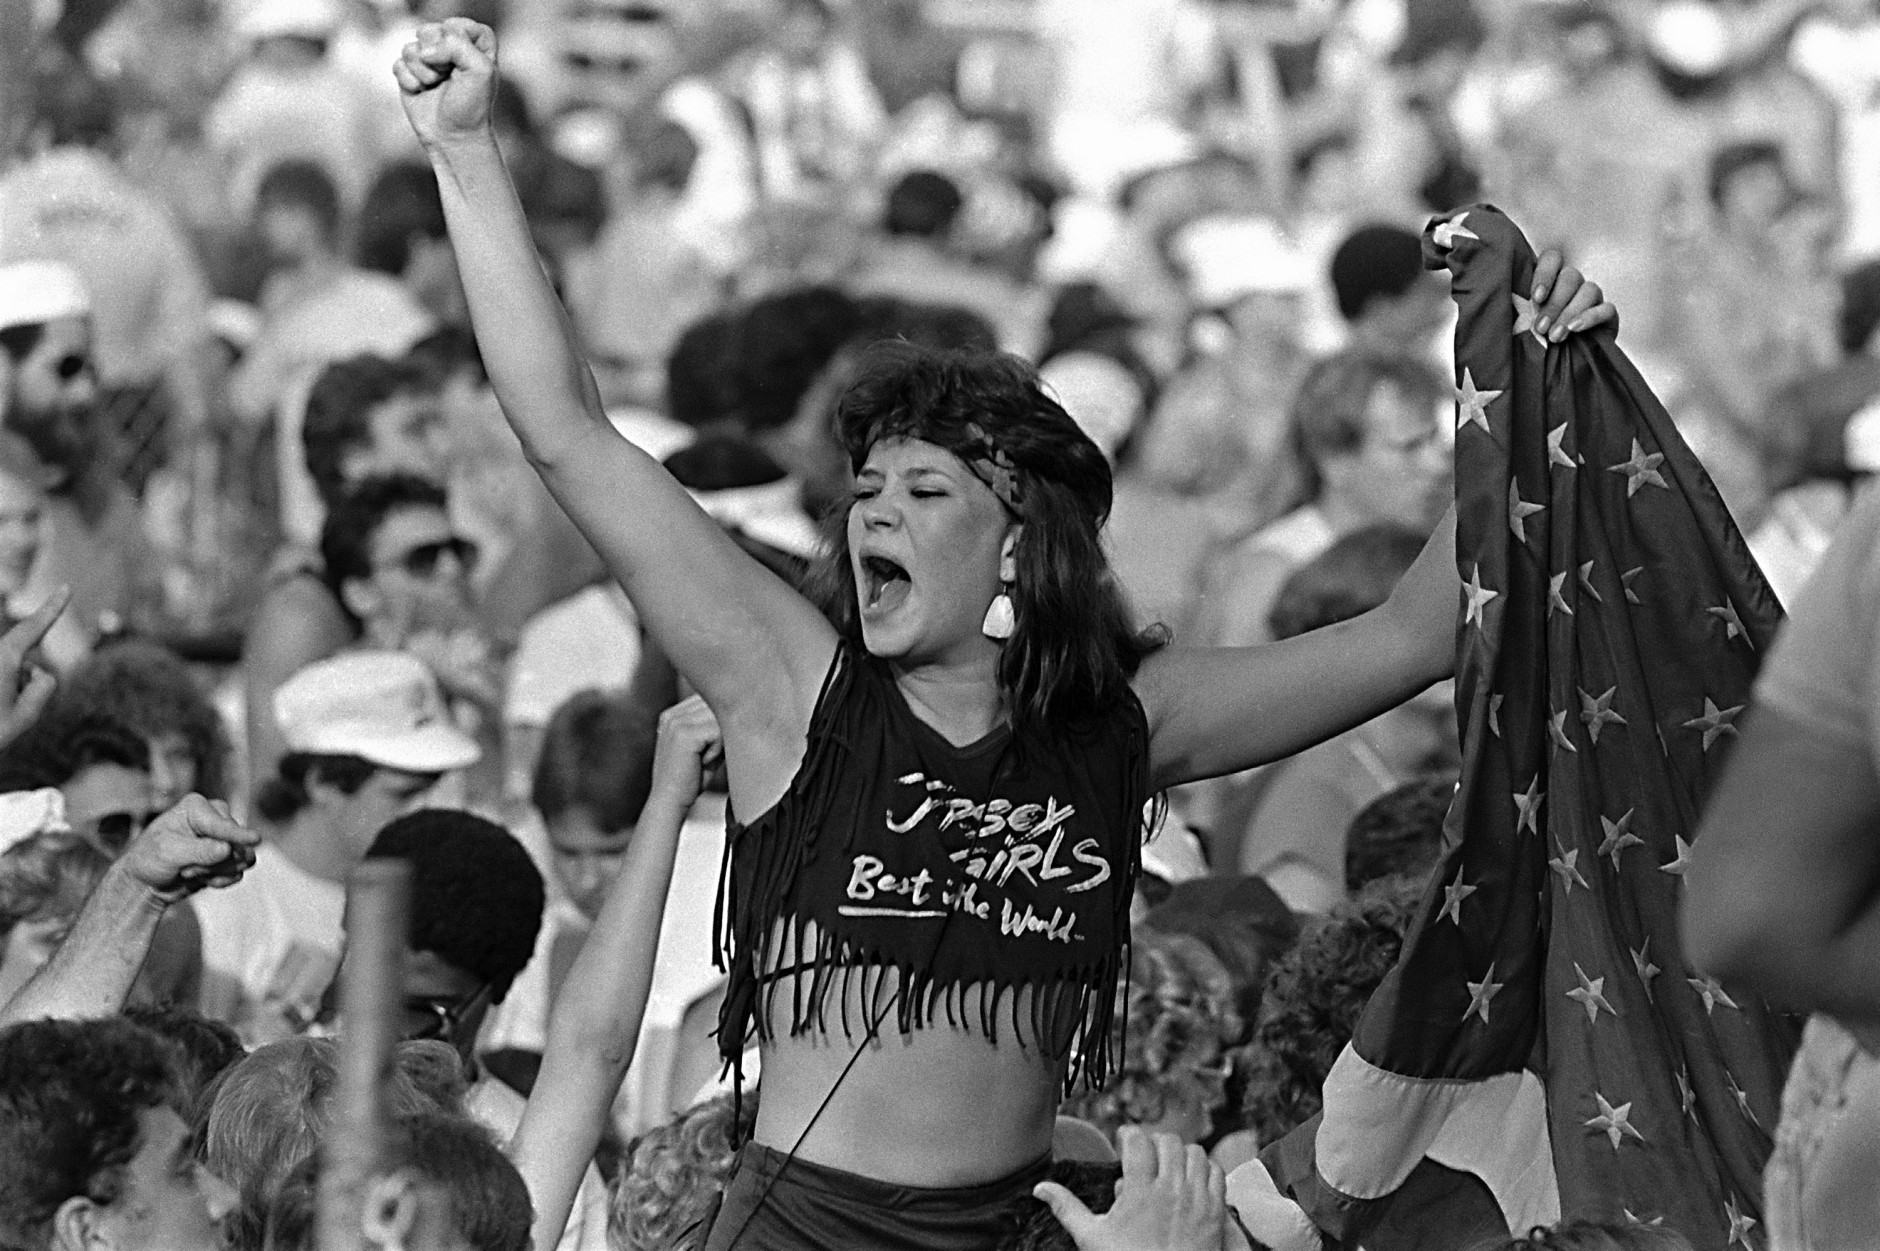 An unidentified fan, sporting a 'Jersey Girls Best in the World' t-shirt, cheers before the start of the Live Aid concert at Philadelphia's JFK Stadium, Saturday, July 13, 1985.  (AP Photo/Rusty Kennedy)